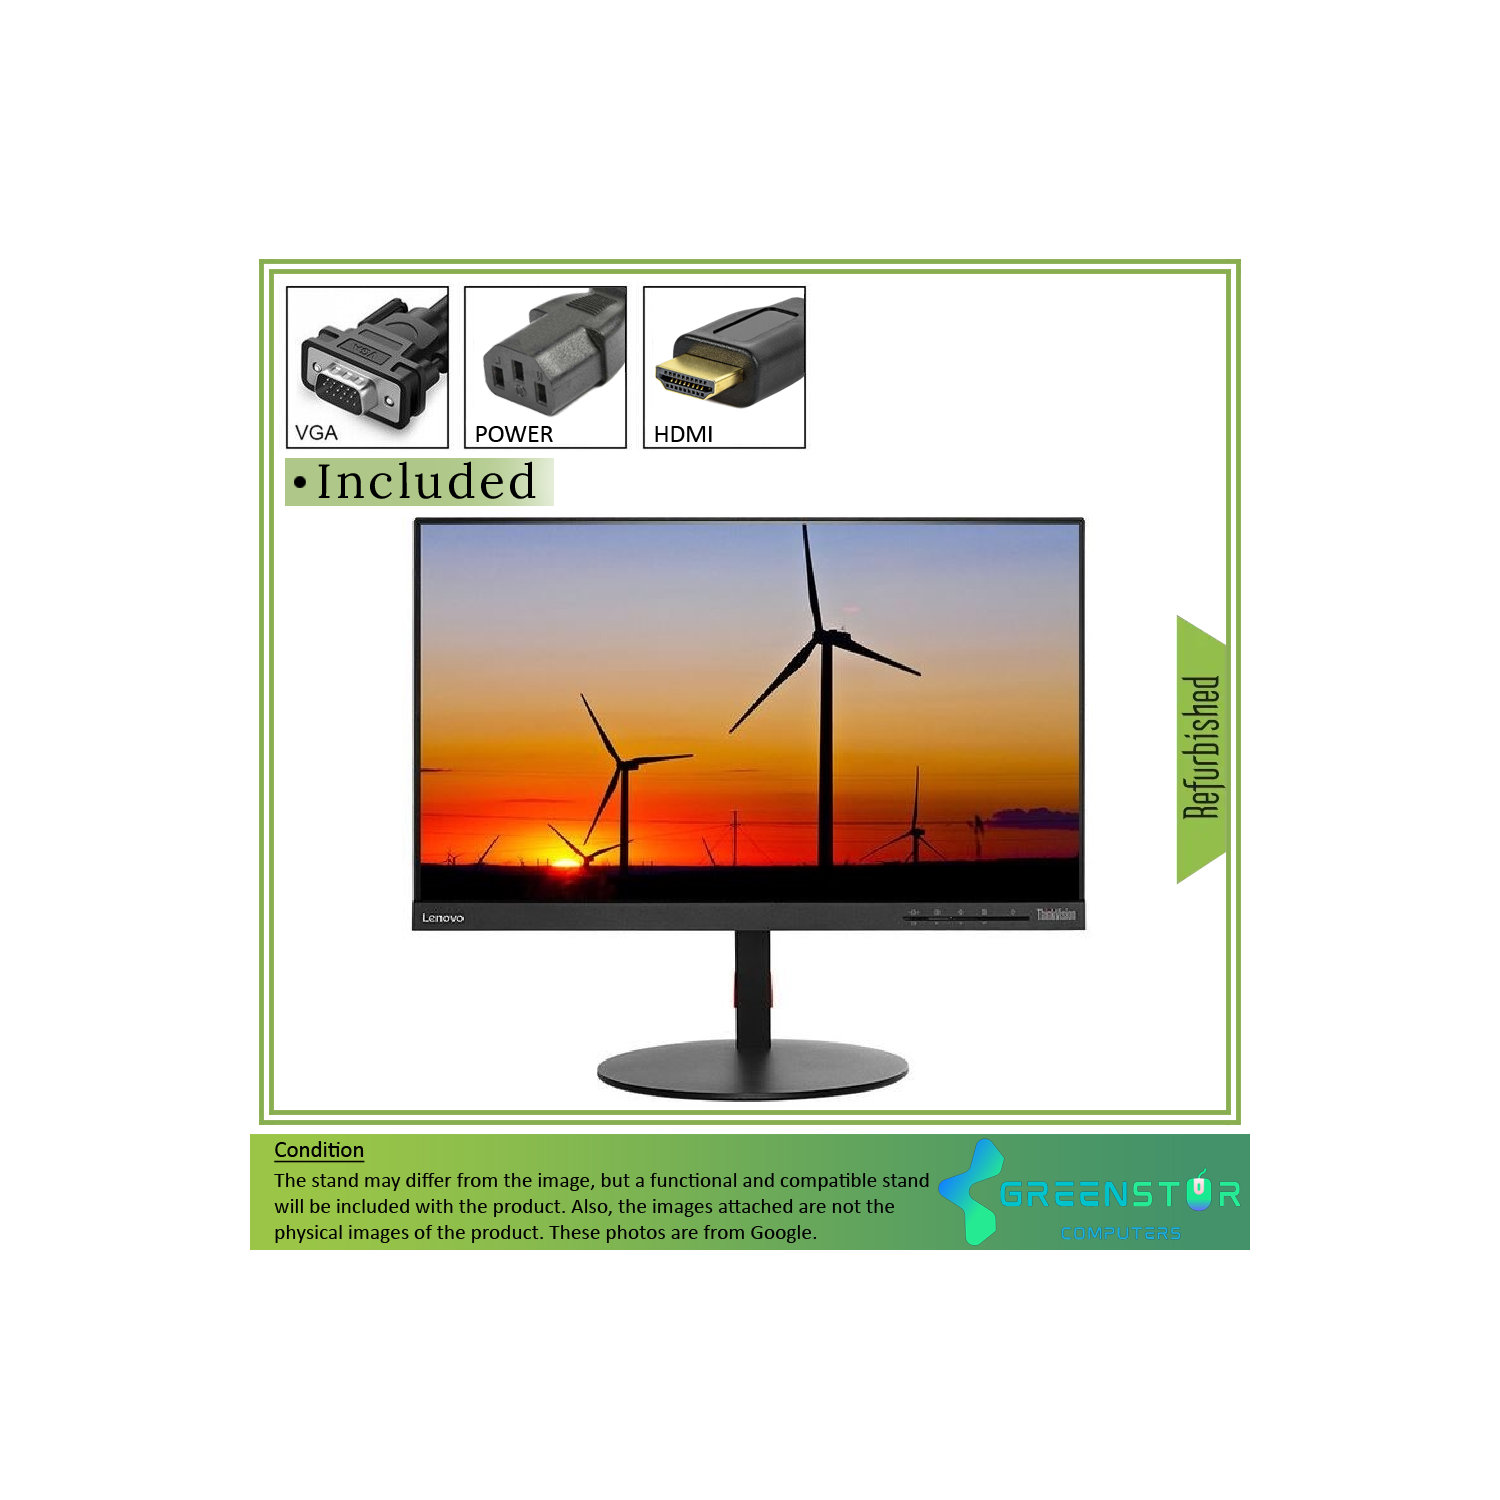 Refurbished(Good) - Lenovo ThinkVision T23i-10 23" Widescreen 1920 x 1080 FHD LED Backlit LCD IPS Monitor